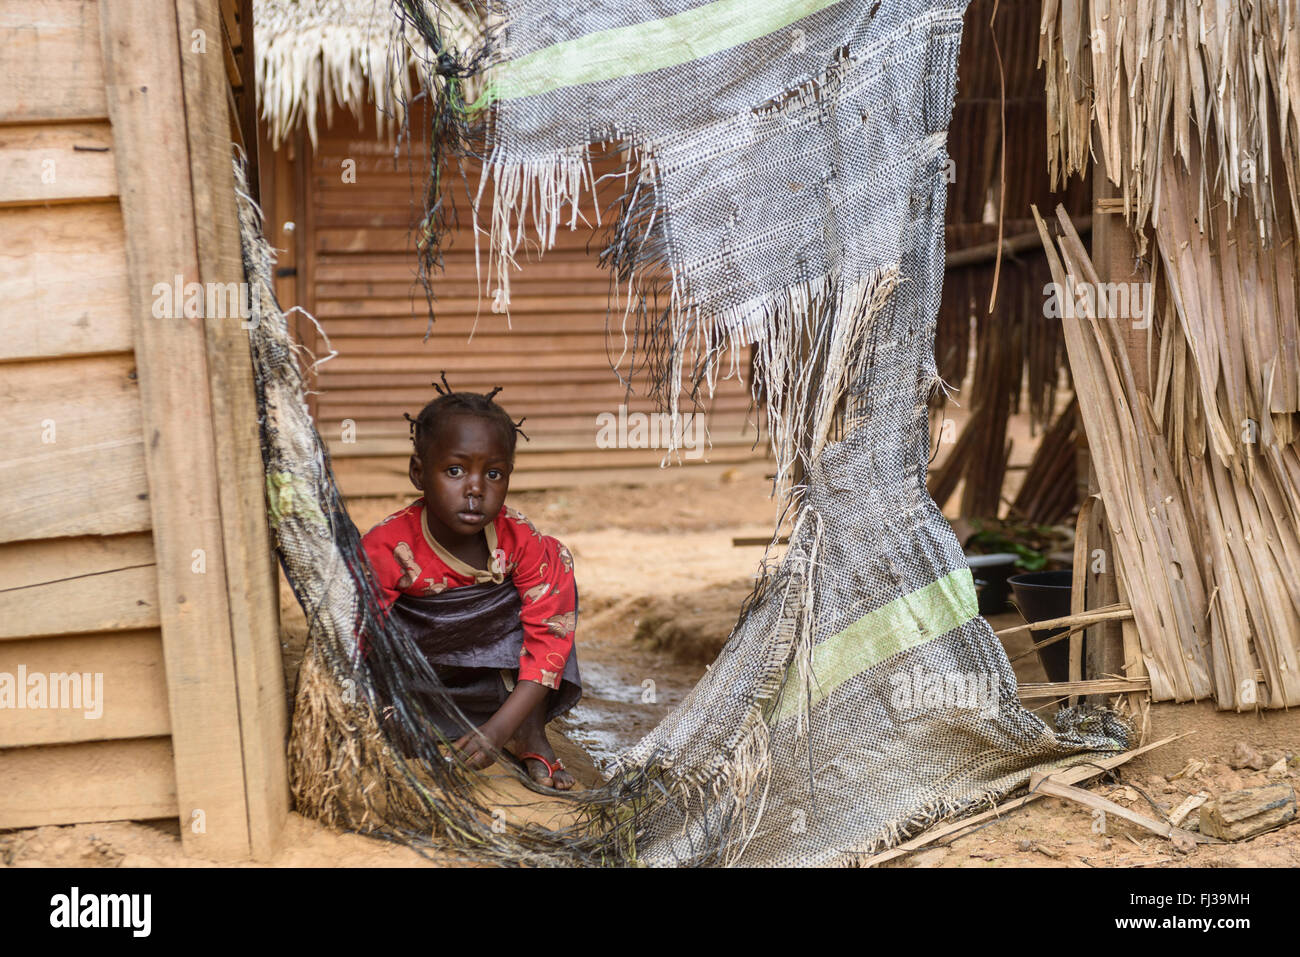 UNHCR refugee camp for the Fulani people, Cameroon, Africa Stock Photo